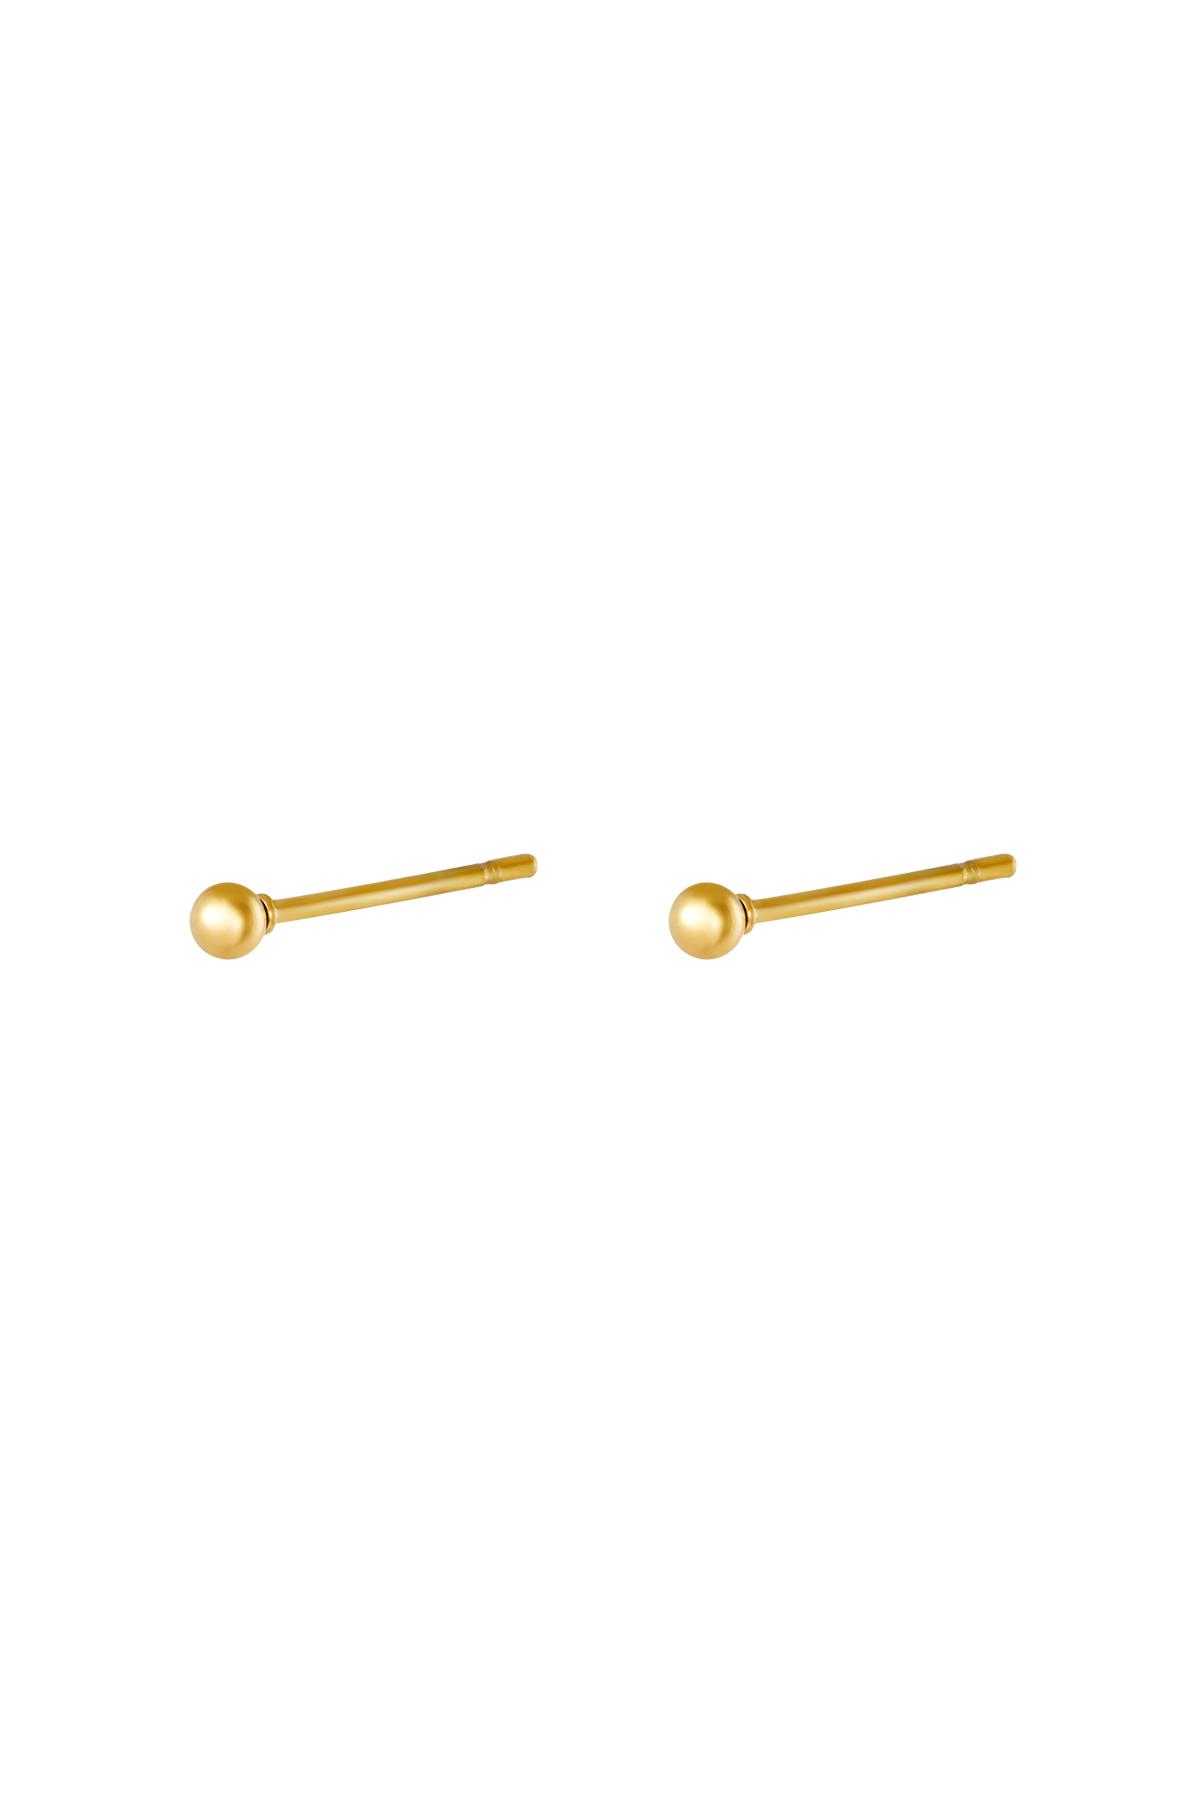 Gold / Earrings Small Dot Gold Stainless Steel Picture2